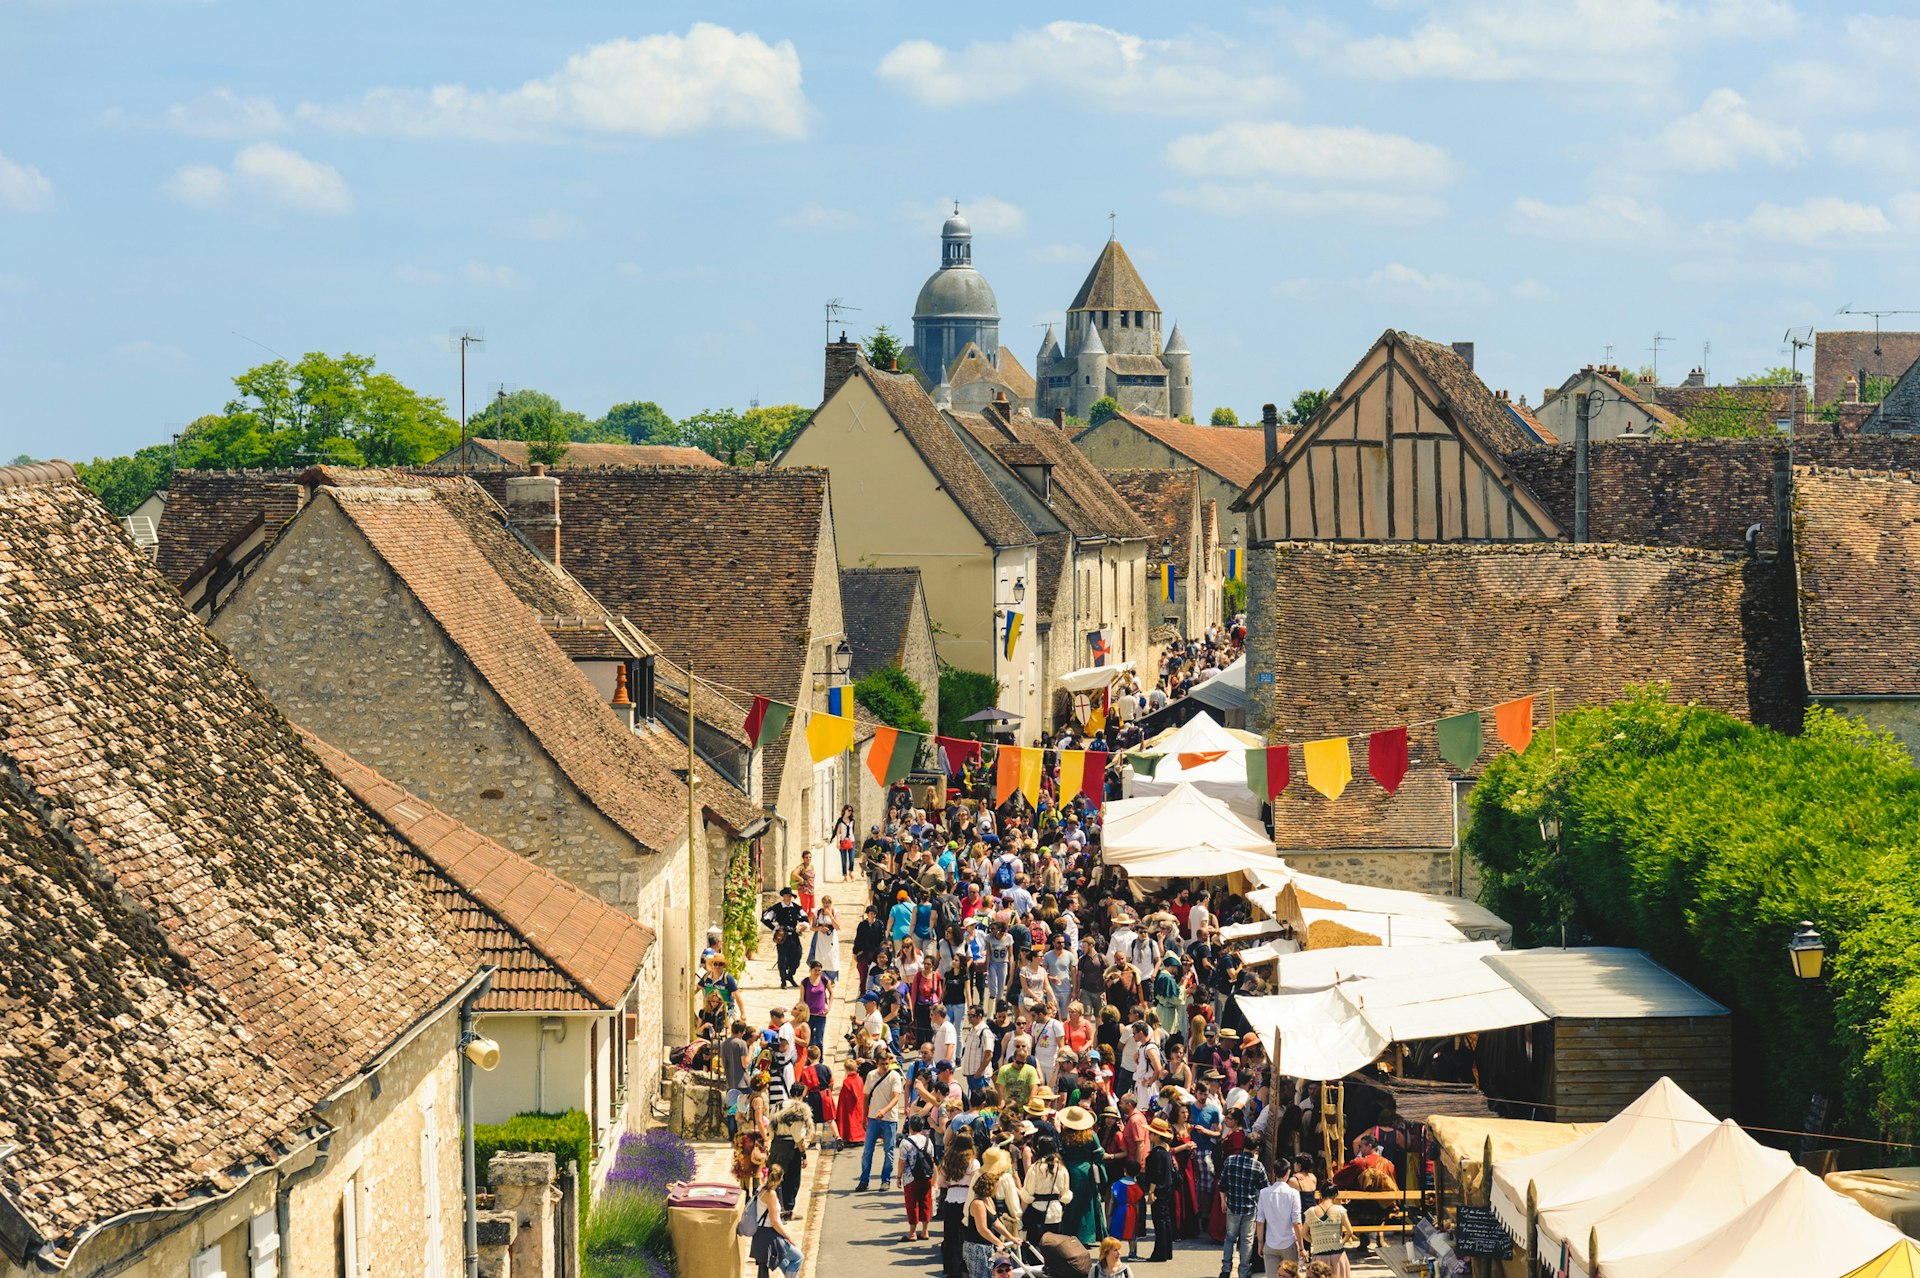 An aerial shot of a medieval town. The narrow street is decorated with colorful bunting as people attend a festival there